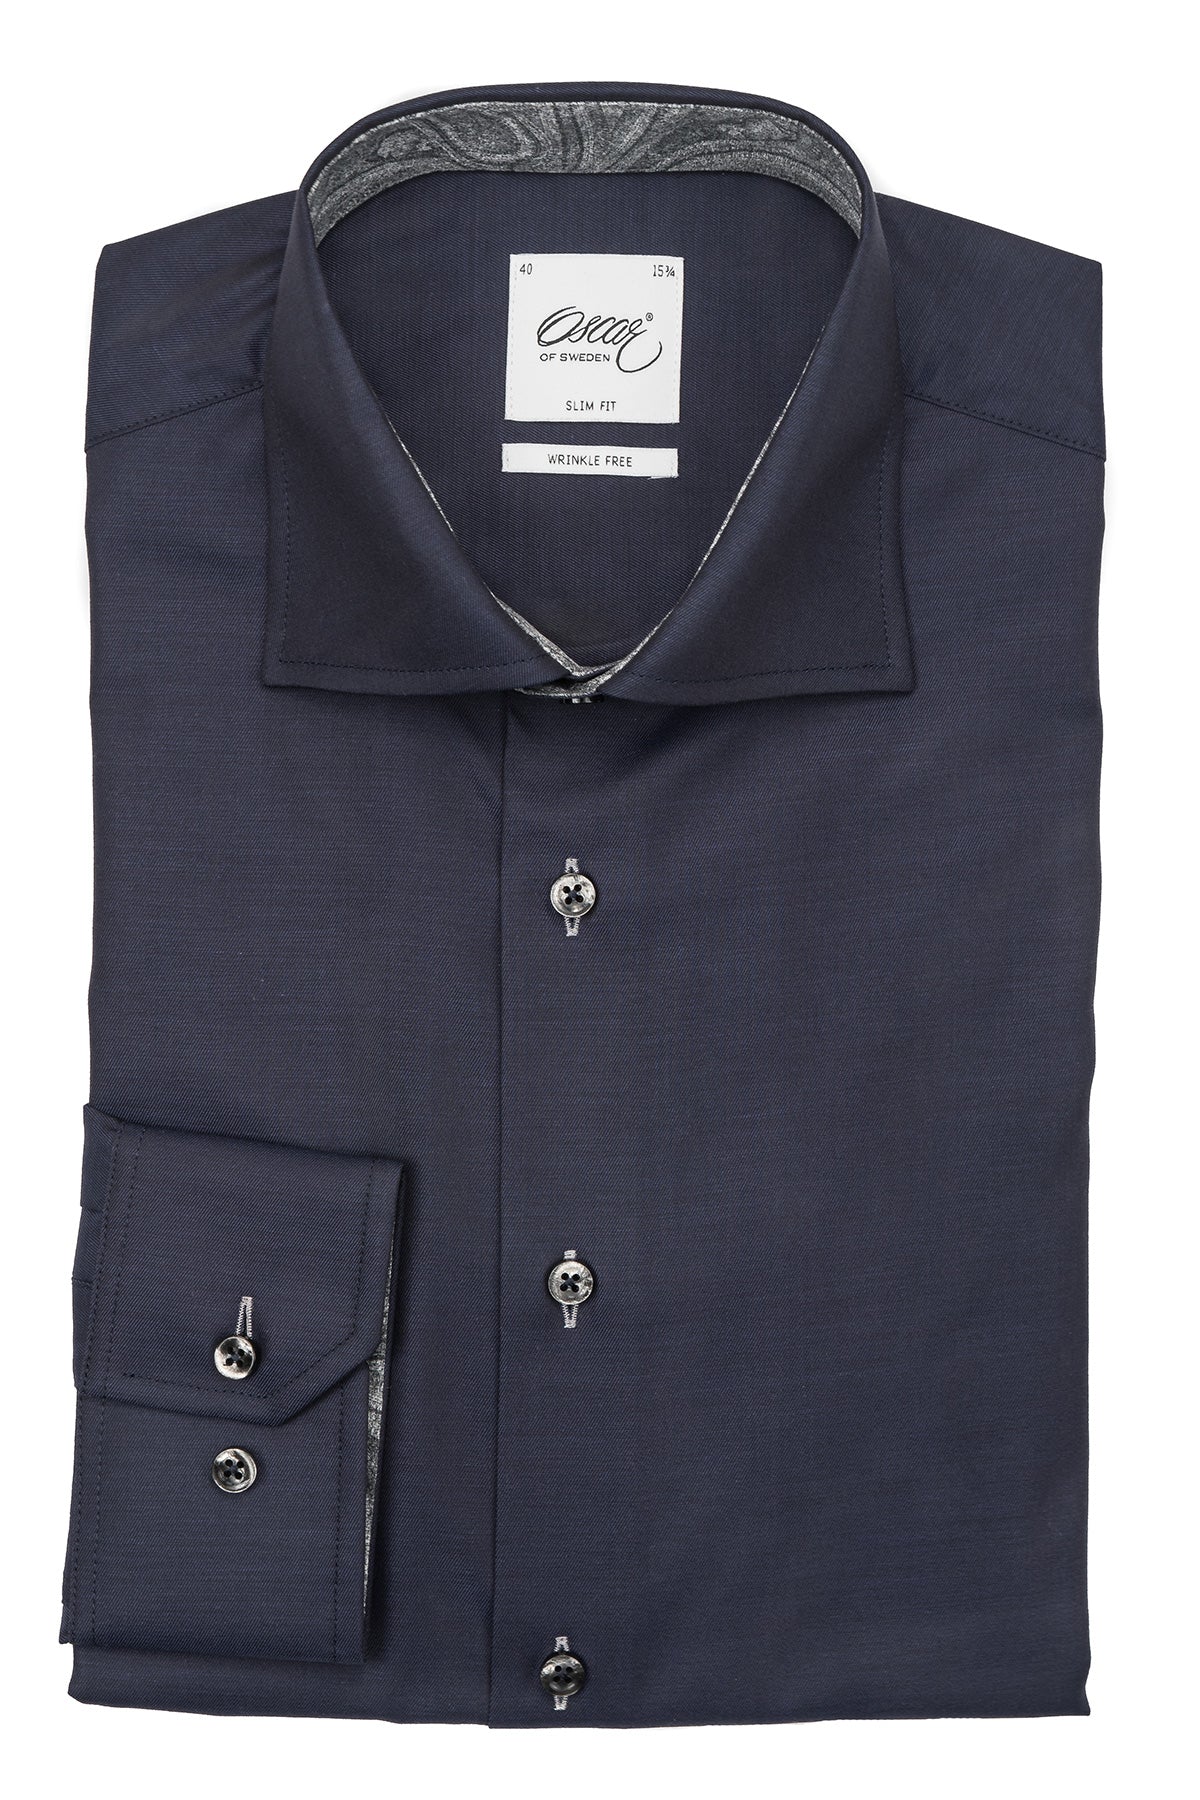 Navy blue slim fit shirt with grey contrast details